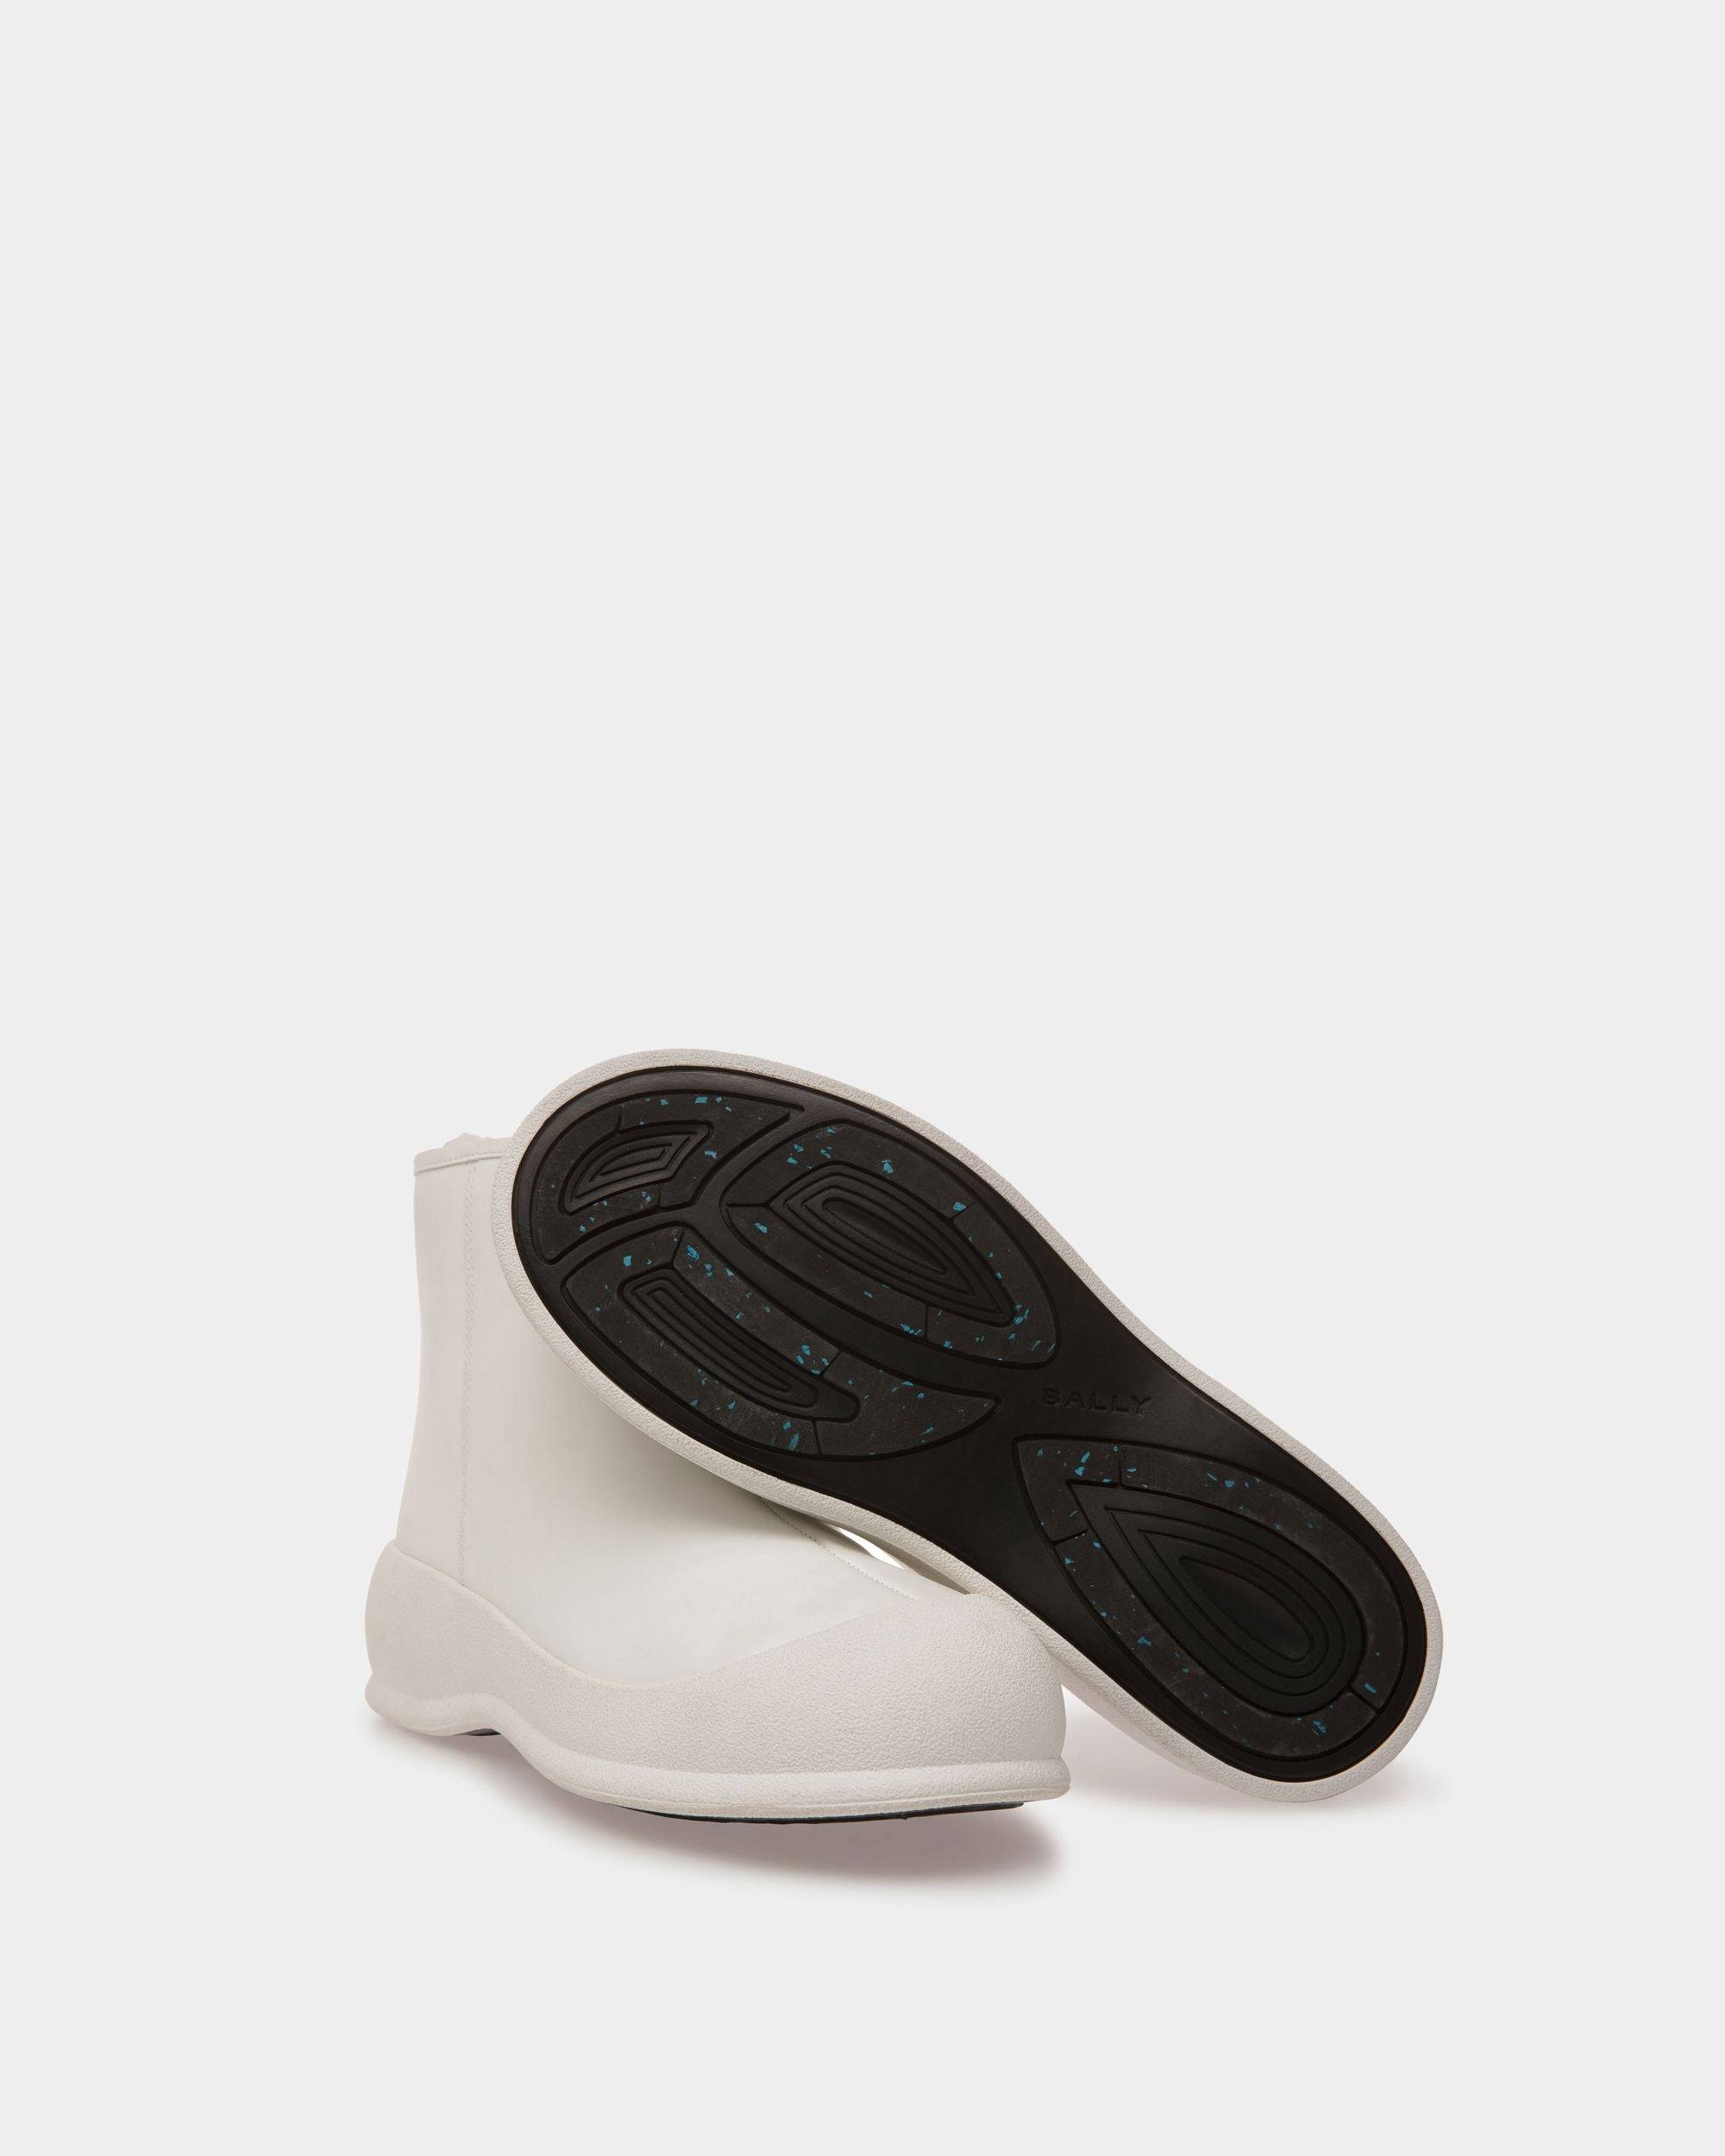 Carsey | Women's Booties | White Rubber-coated Leather | Bally | Still Life Below